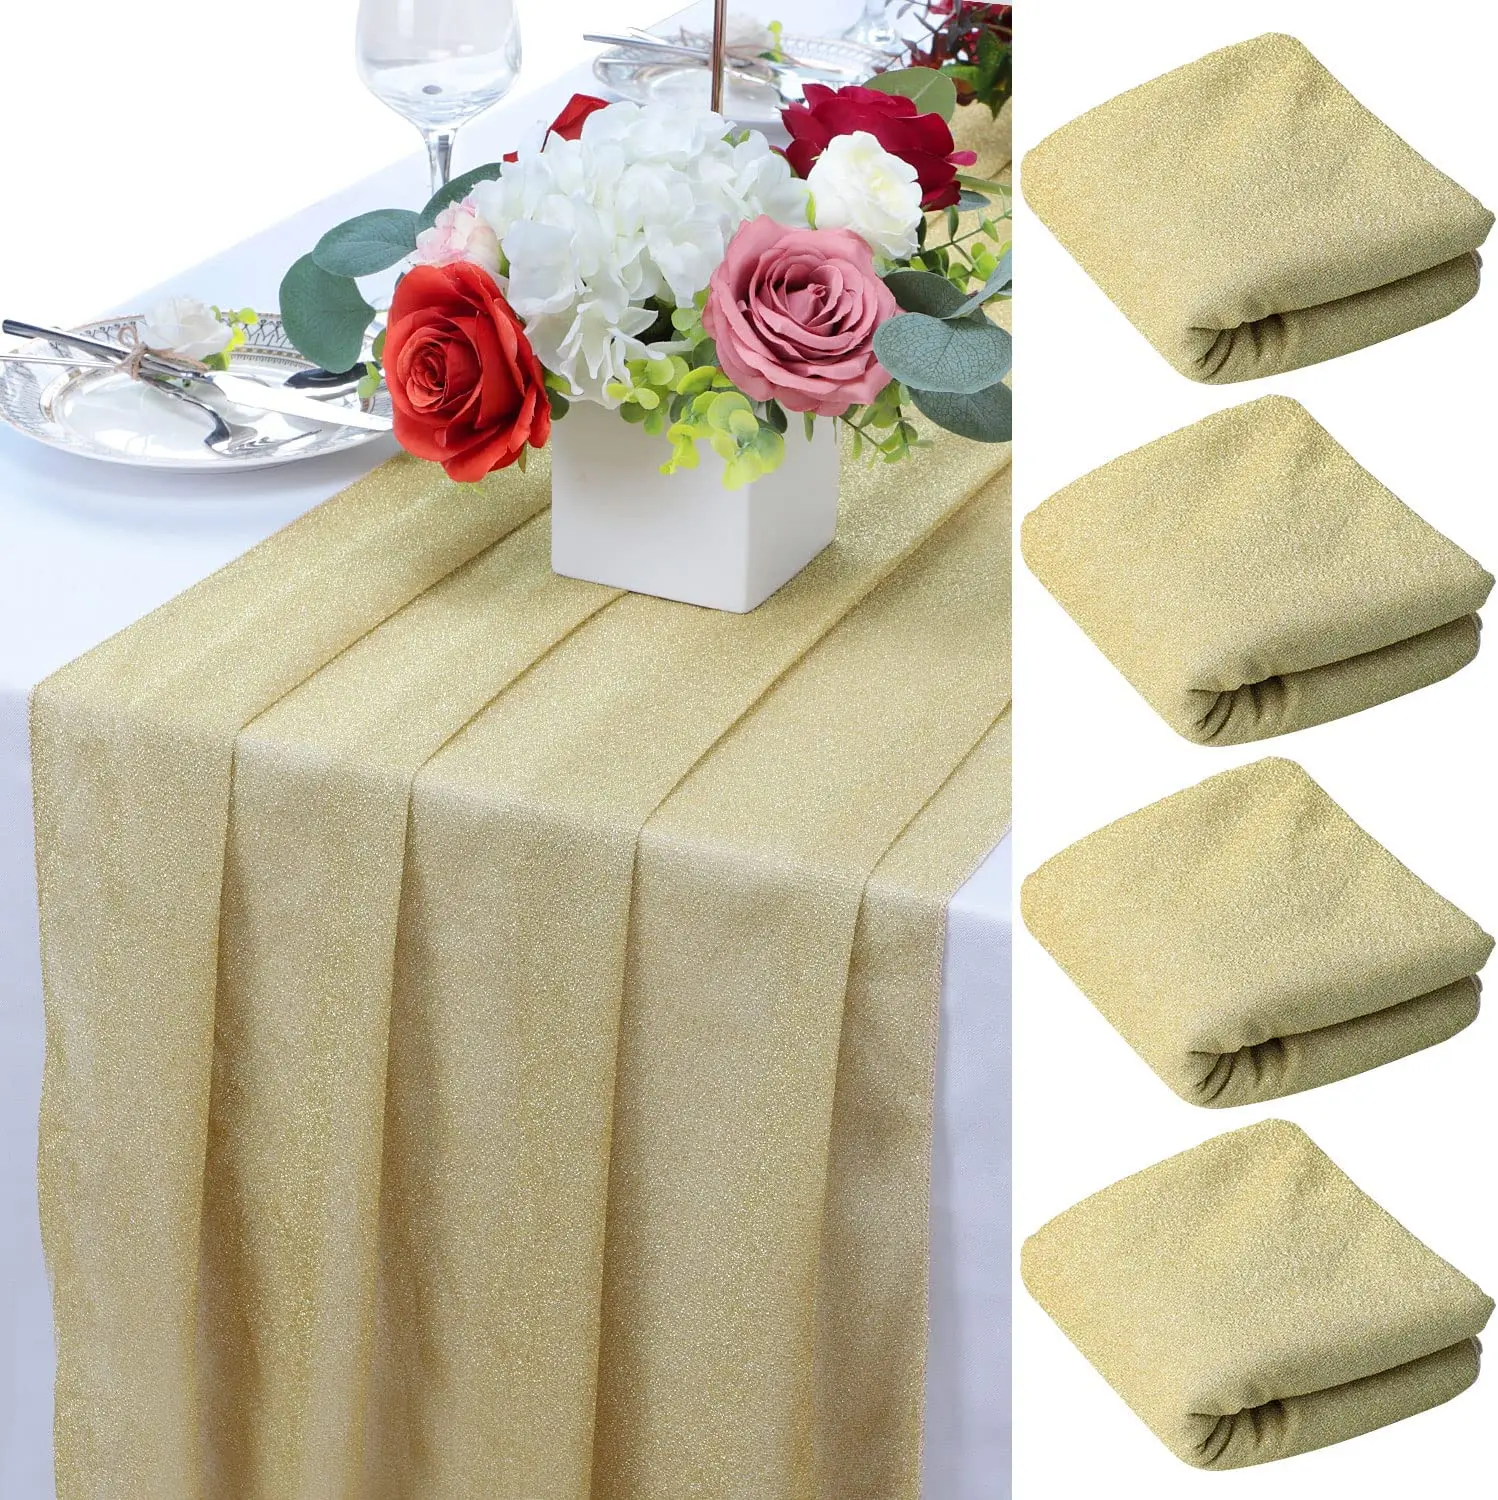 

4pcs Wedding Gold Glitter Table Runner,29*120" Sheer Gauze Dining Table Decorations For Wedding Banquets Bridal Party